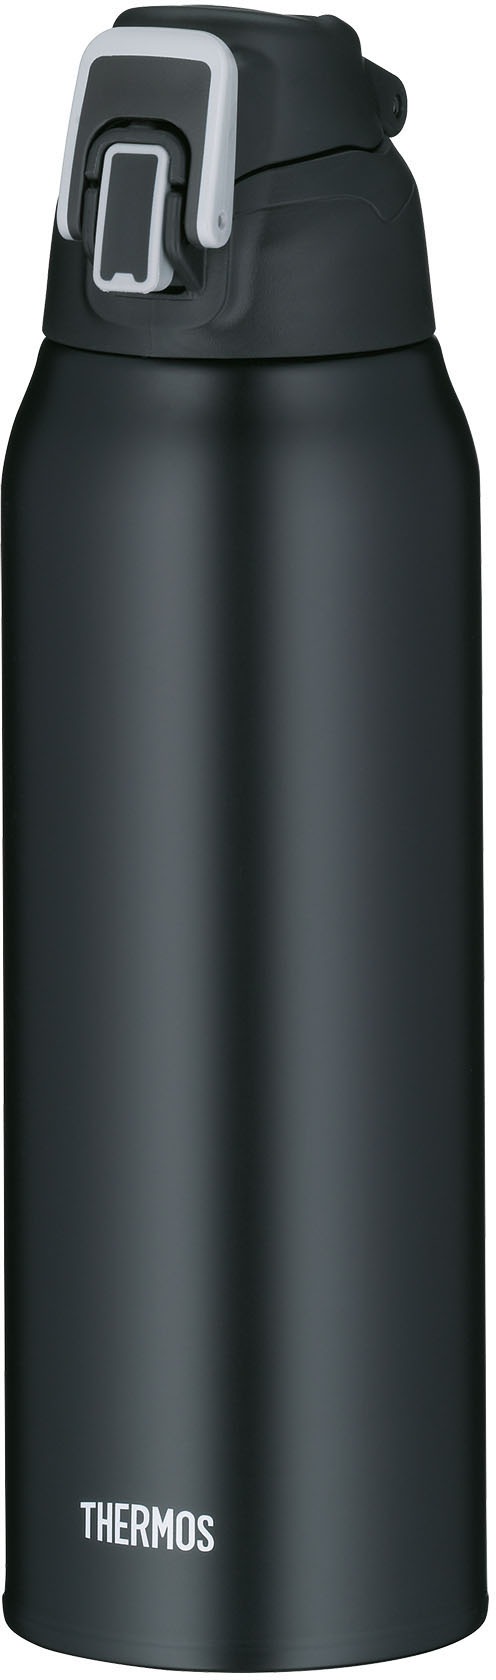 THERMOS Thermoflasche »Ultralight«, mit Softhülle 1,0 l